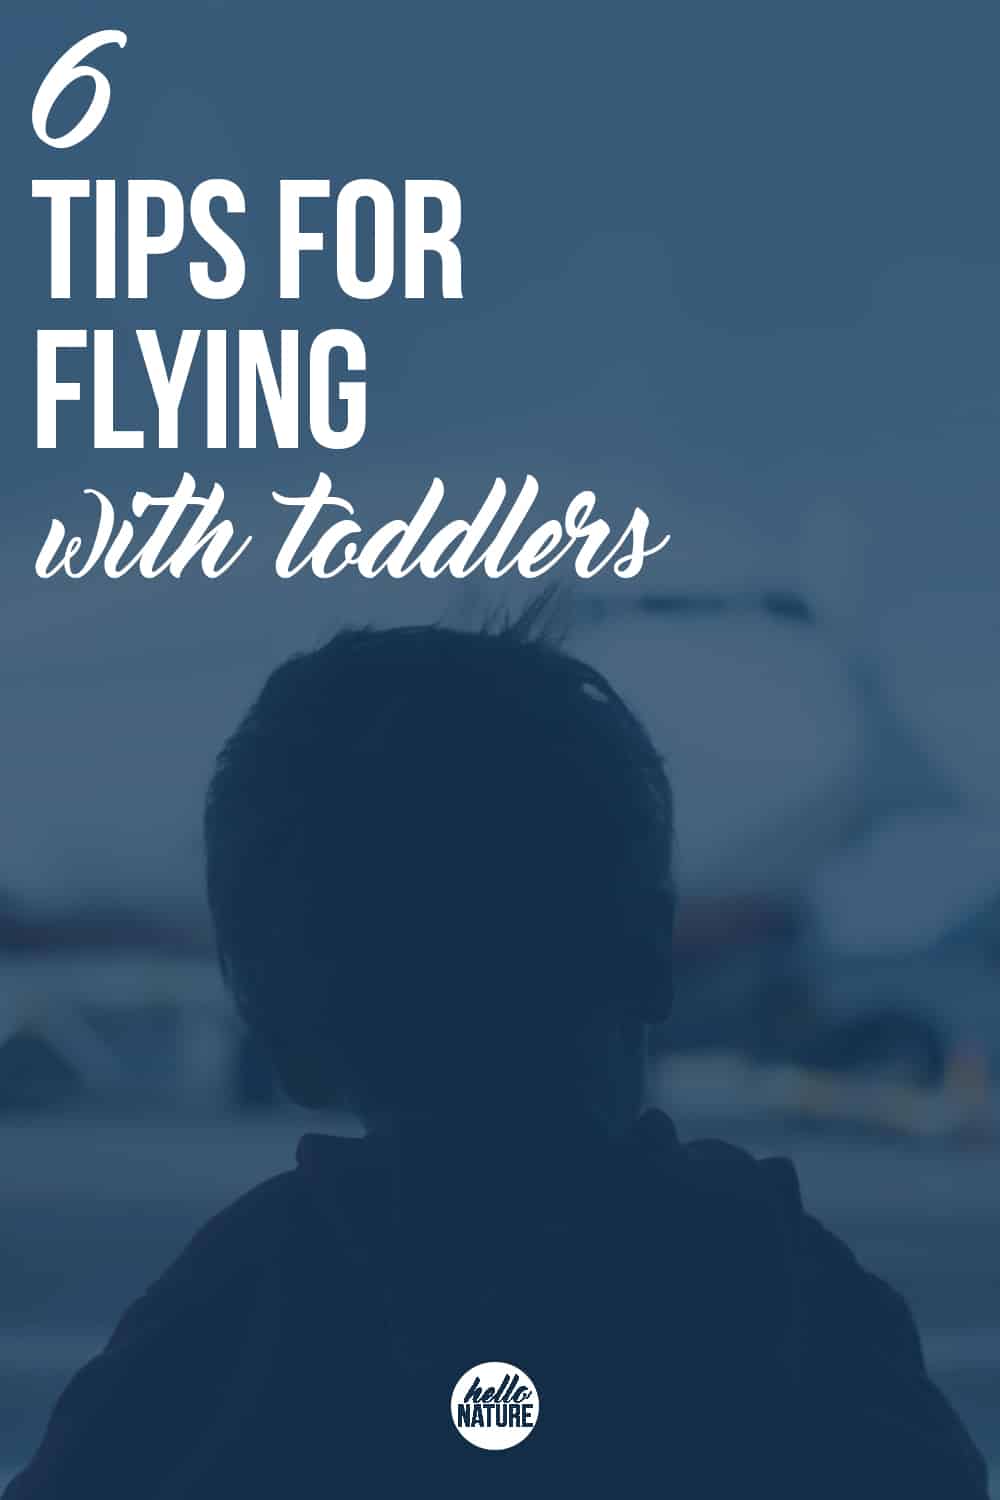 Getting ready to fly the friendly skies with your family? These six tips for flying with toddlers will make it easier and more enjoyable!